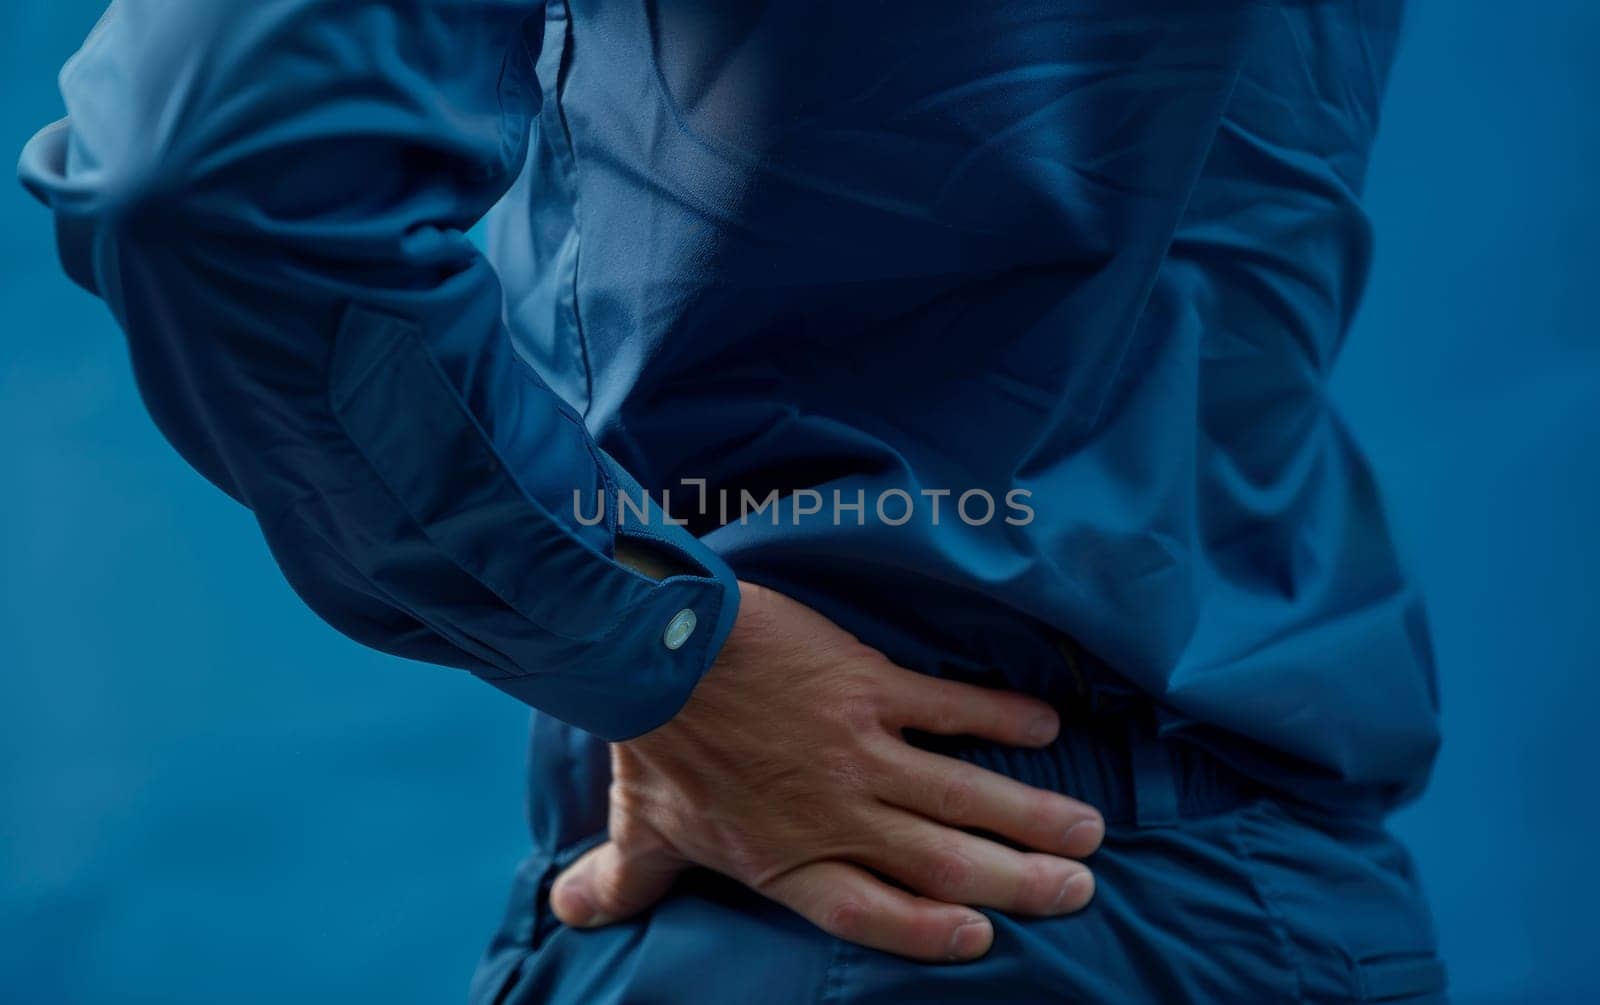 A figure in blue is shown gripping their lower back in pain. The stark blue tone adds an intense, clinical feel to the concept of backache